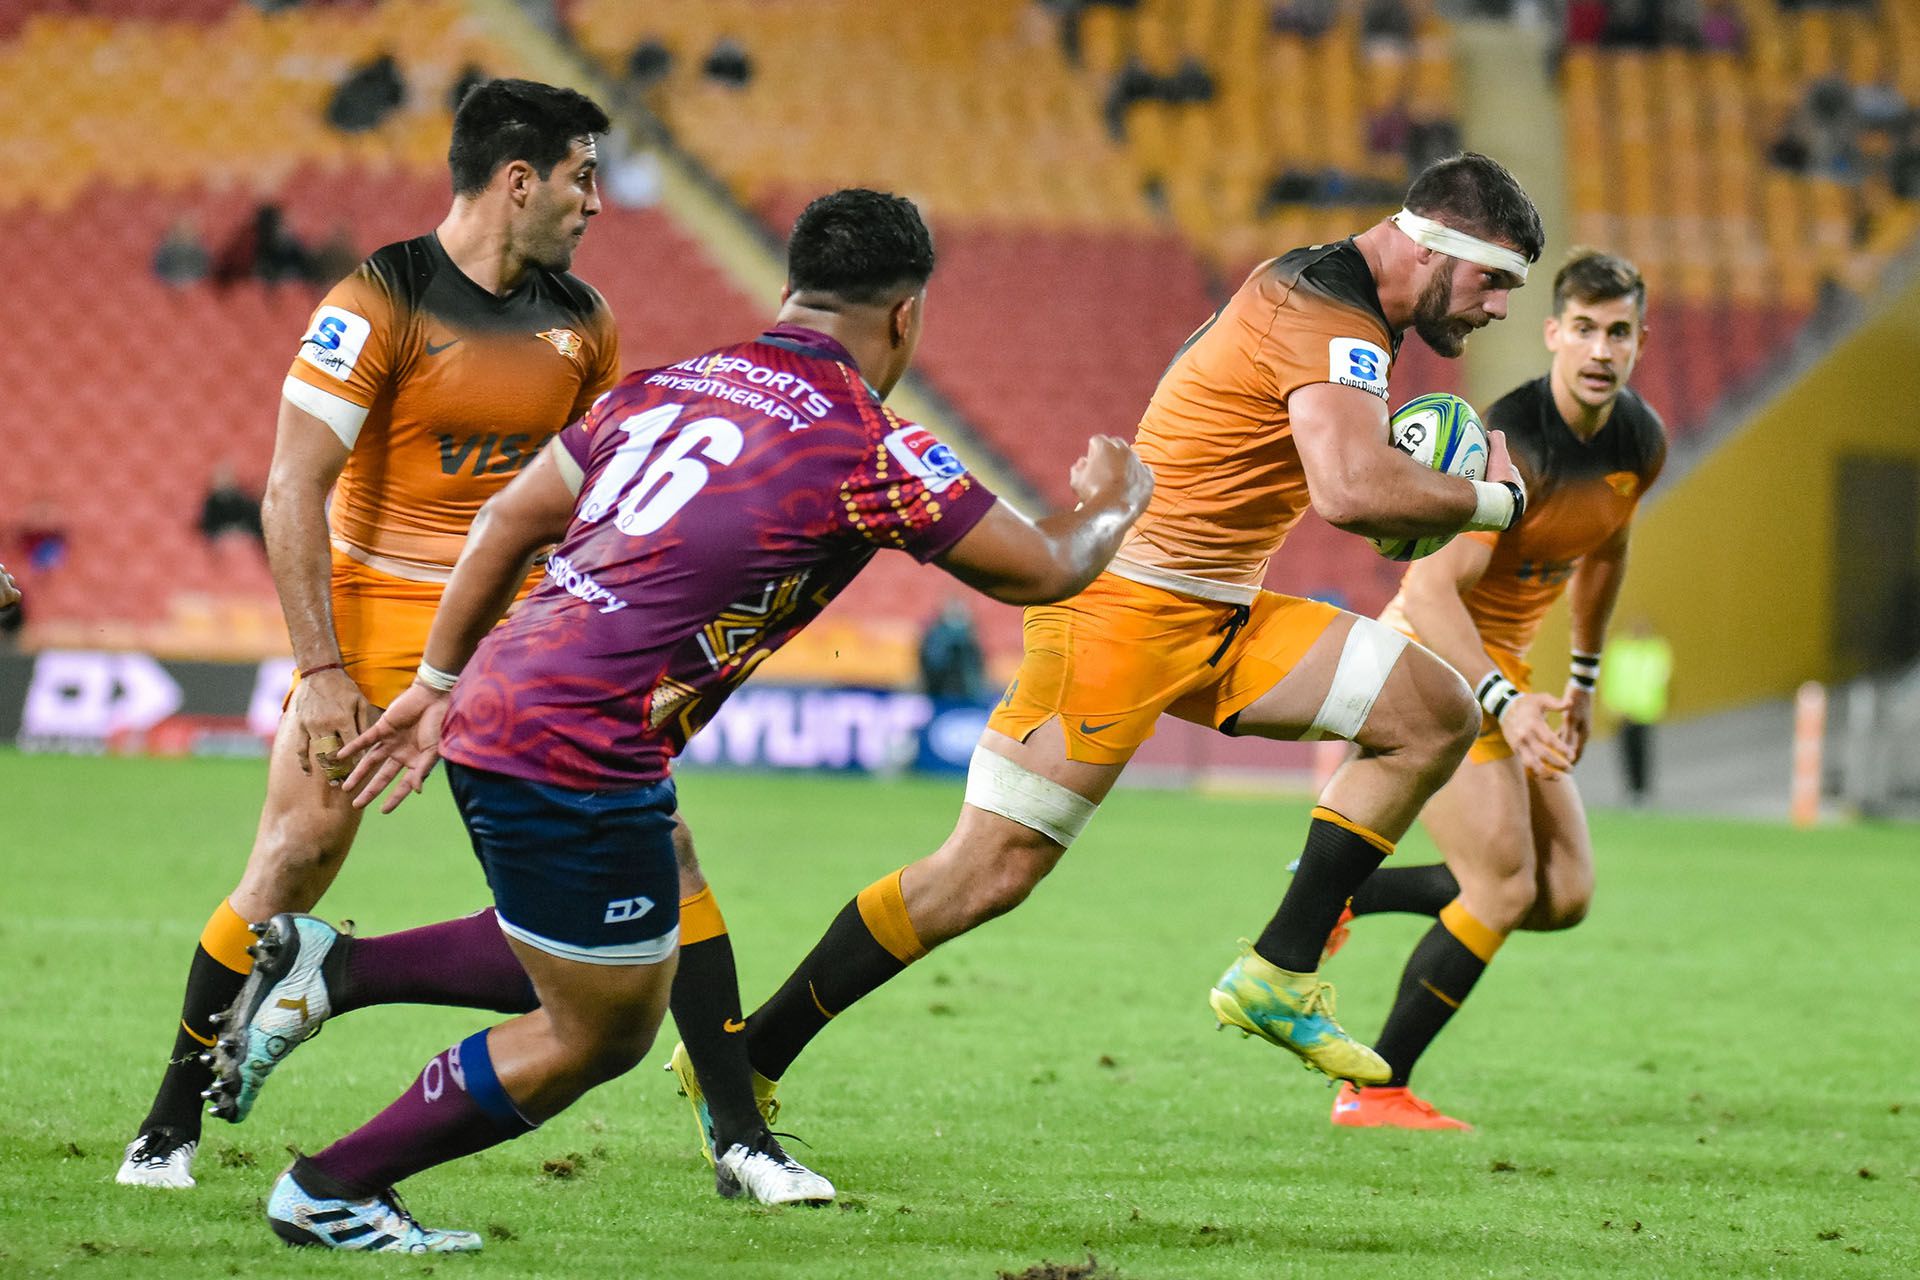 during the Super Rugby Round 16 match between Queensland Reds and the the Jaguares at Suncorp Stadium on June 1, 2019 in Brisbane, Queensland, Australia. (Photo by Stephen Tremain) (@jaguaresarg)